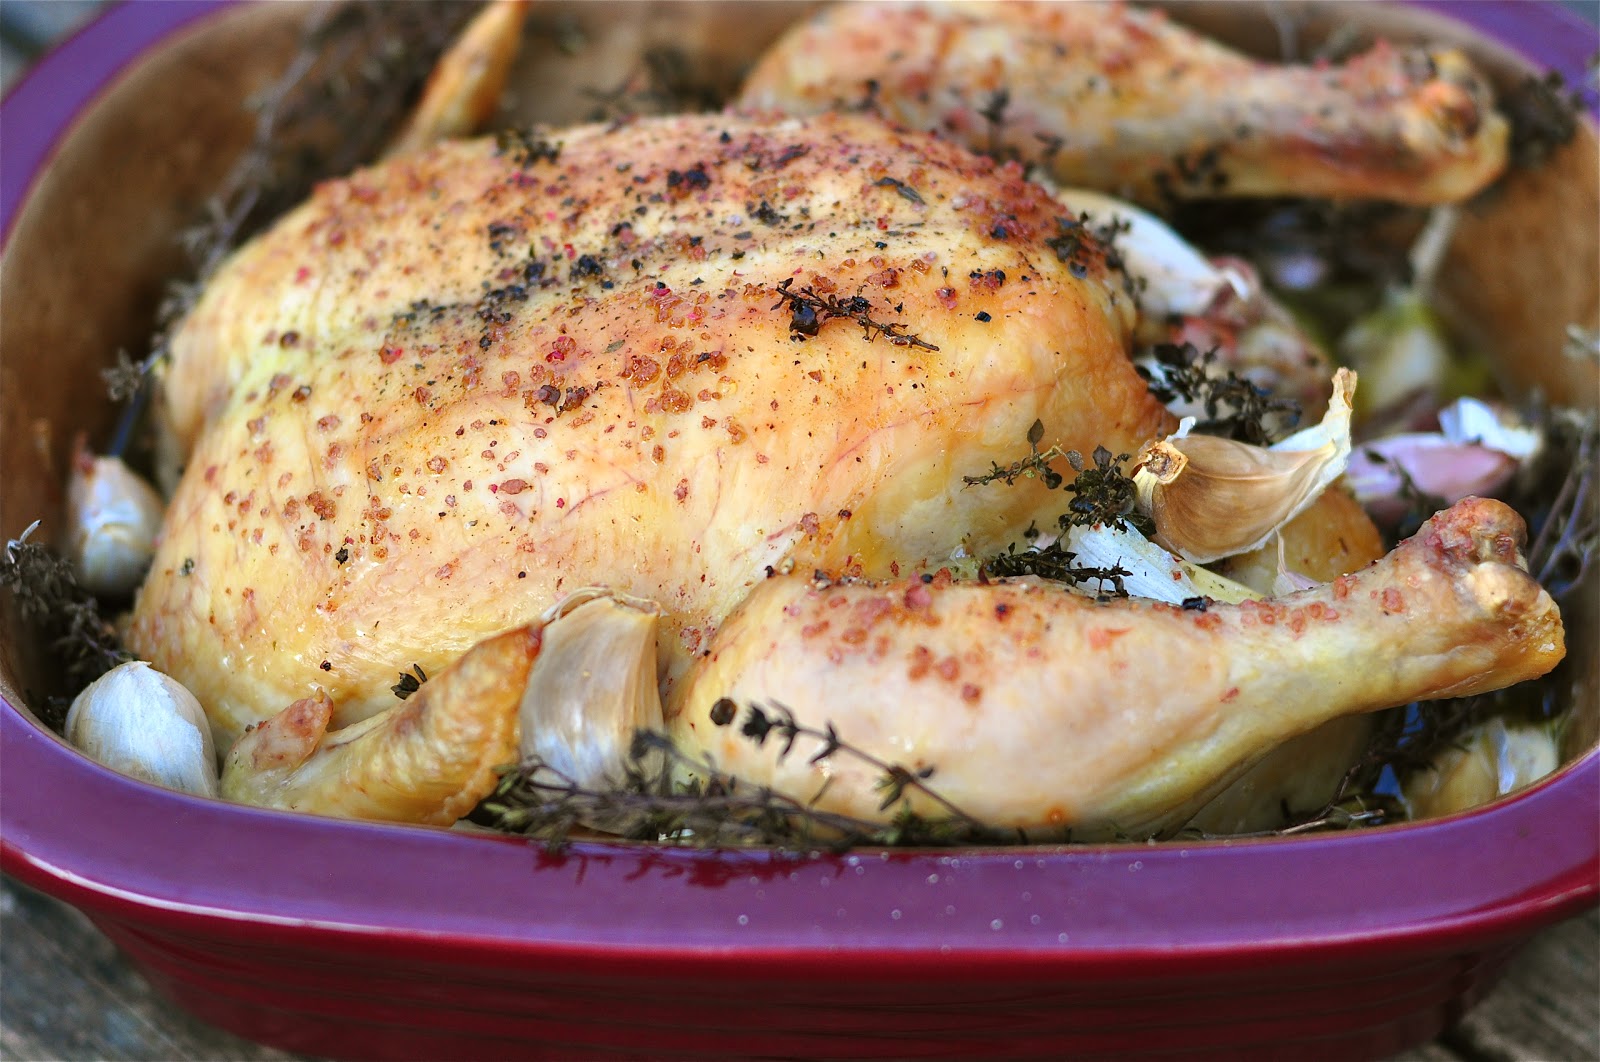 Nourishing Meals®: Simple Whole Roasted Organic Chicken with Garlic & Herbs